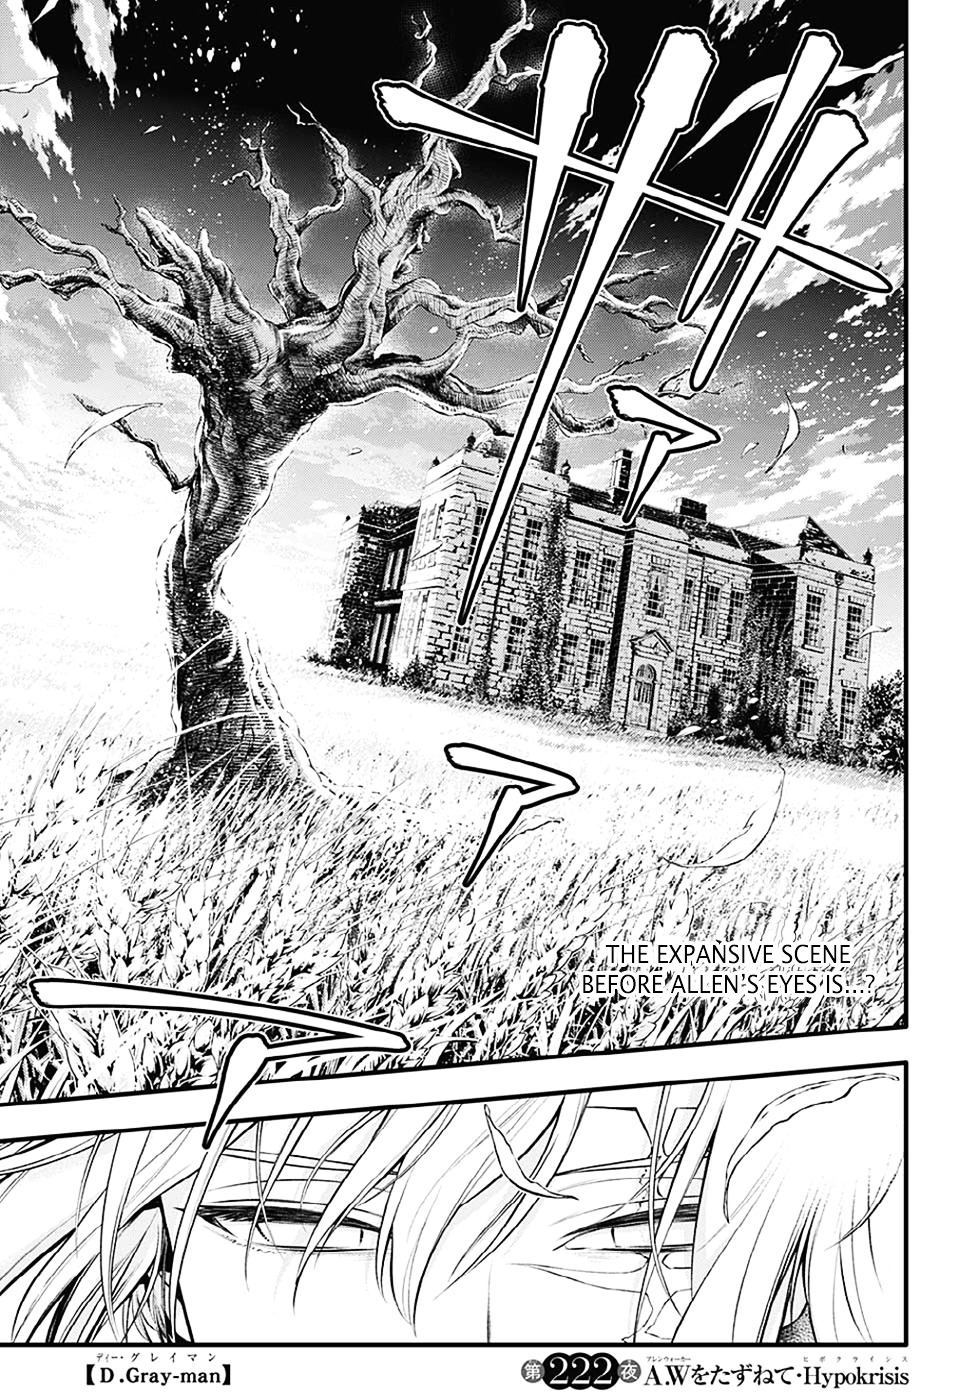 D.gray-Man Vol.25 Chapter 222 (V2) : Calling On A.w. - Hypokrisis - Picture 3